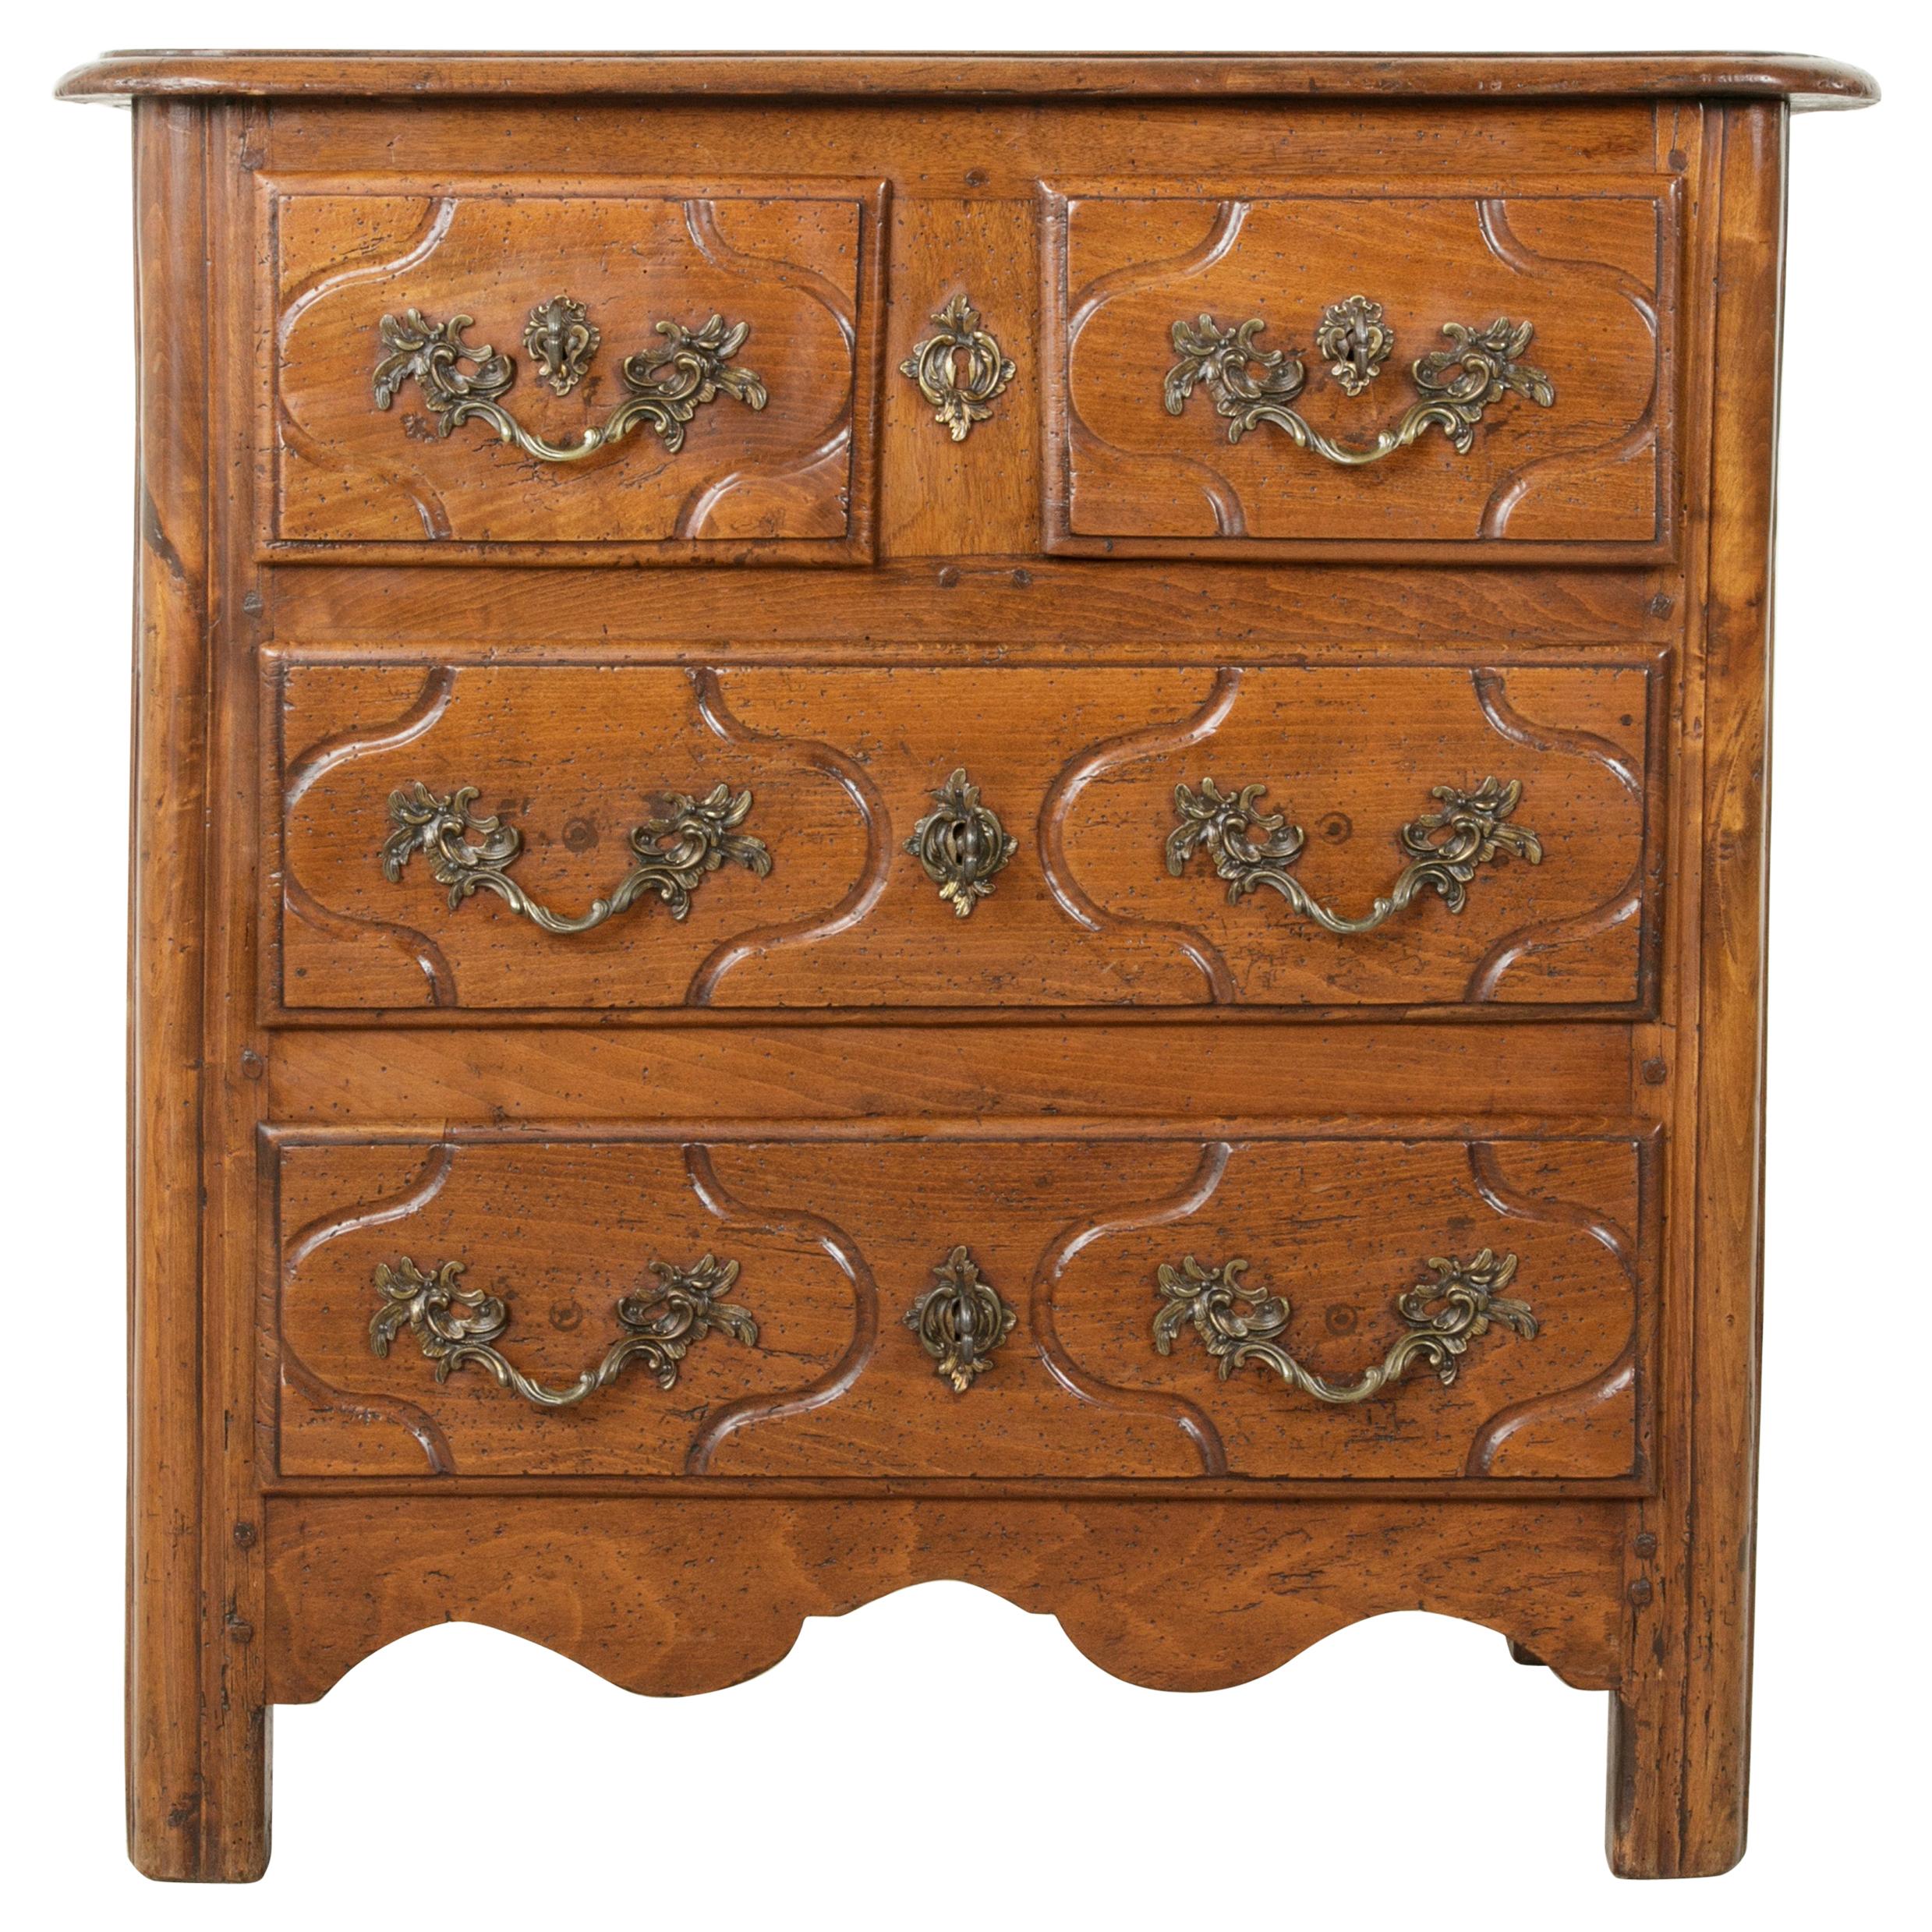 Mid-18th Century French Louis XIV Period Hand Carved Chestnut Commode or Chest